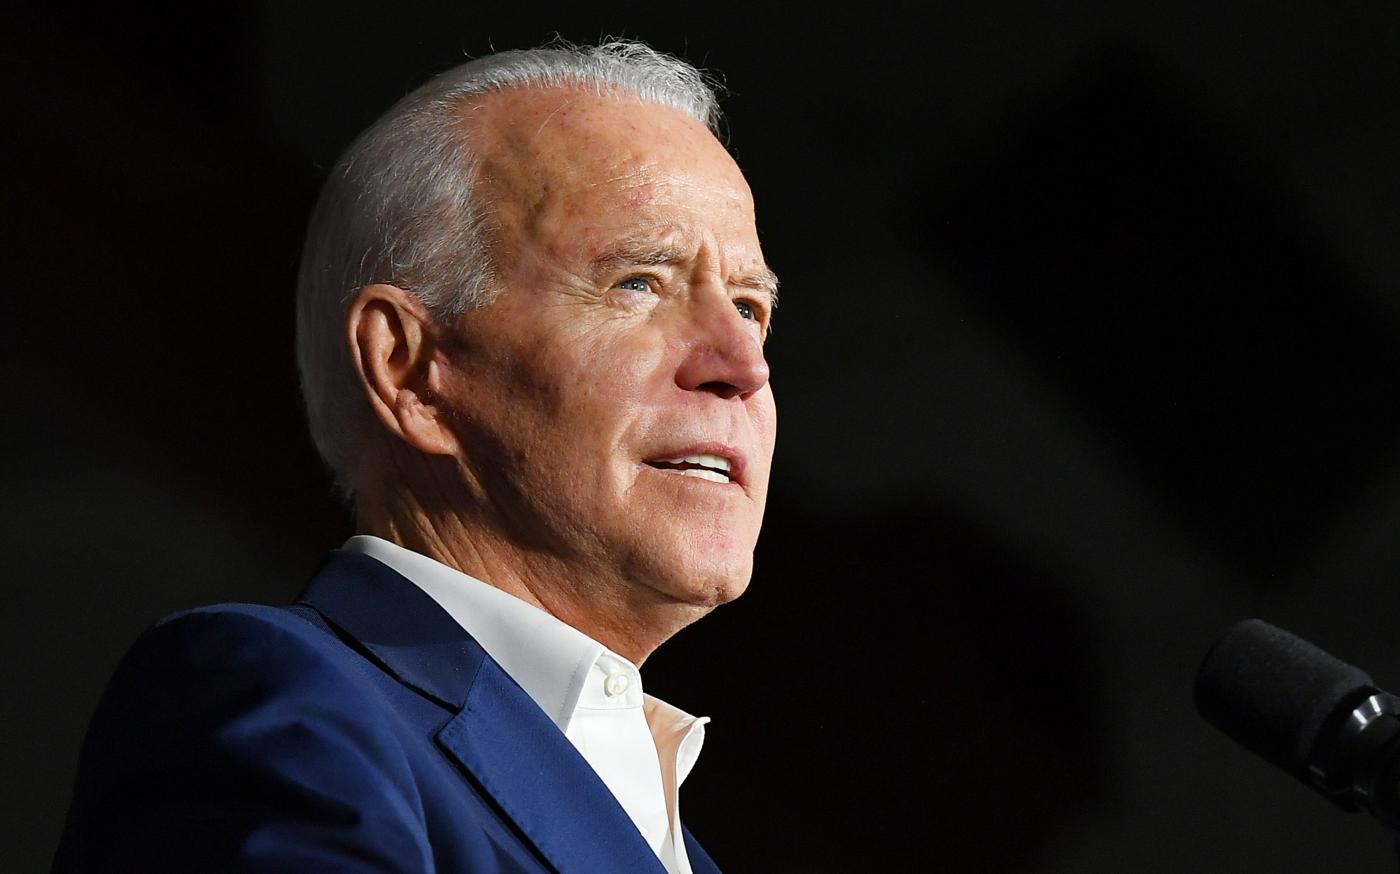 Biden Campaign Accused of 'Cosmetic' Changes as Pro-Modi Aide Remains